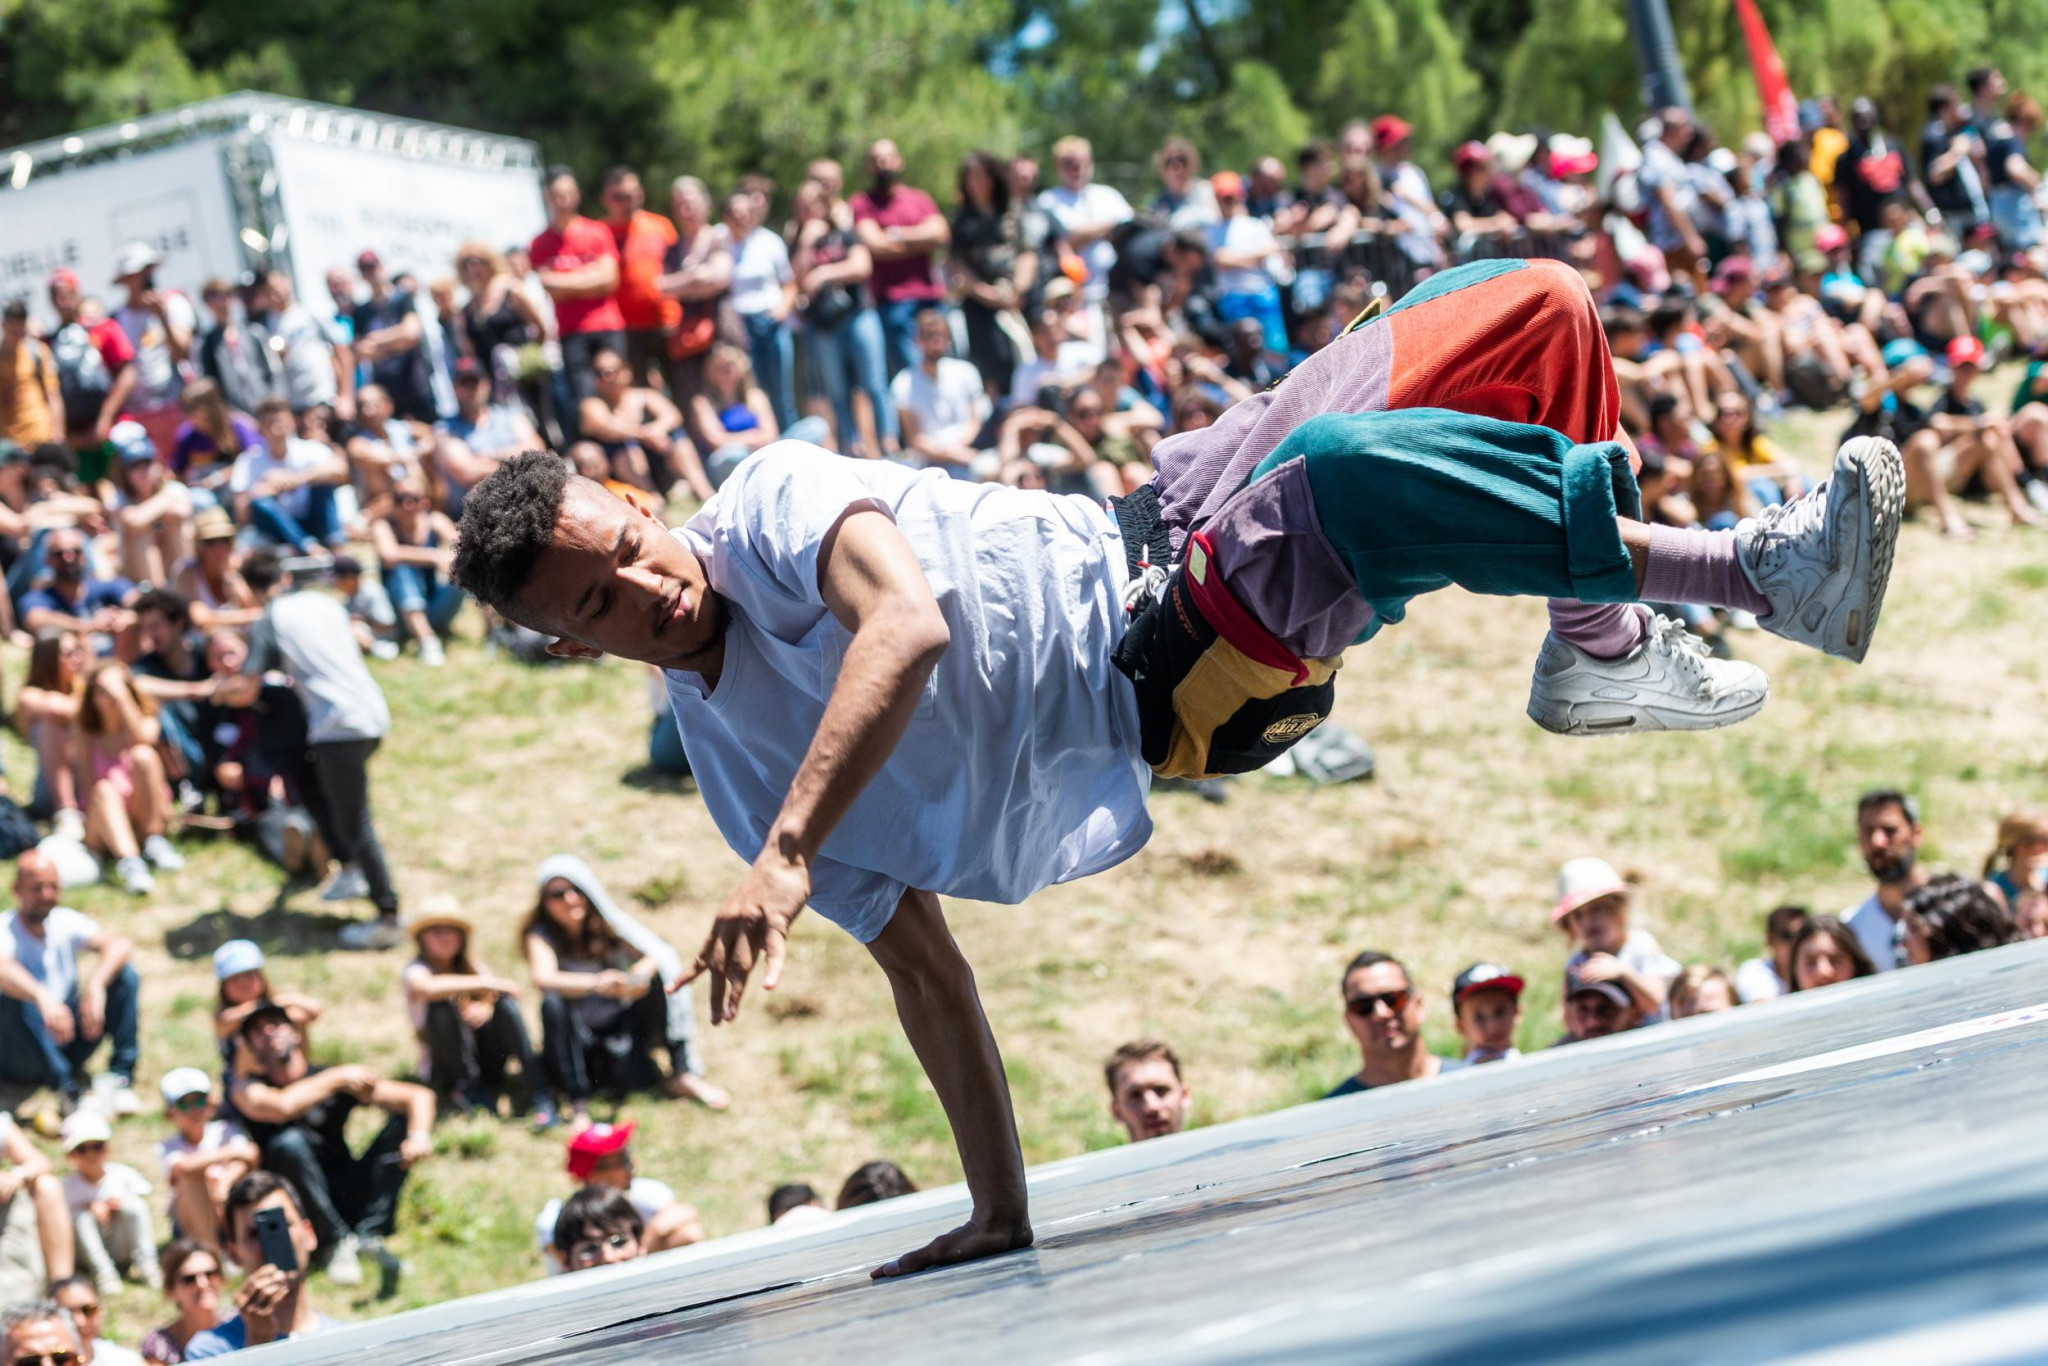 Breaking made its FISE Montpellier debut in 2019 which has helped the sport on its way to Olympic inclusion as it is set to appear at the Games for the first time at Paris 2024 ©FISE